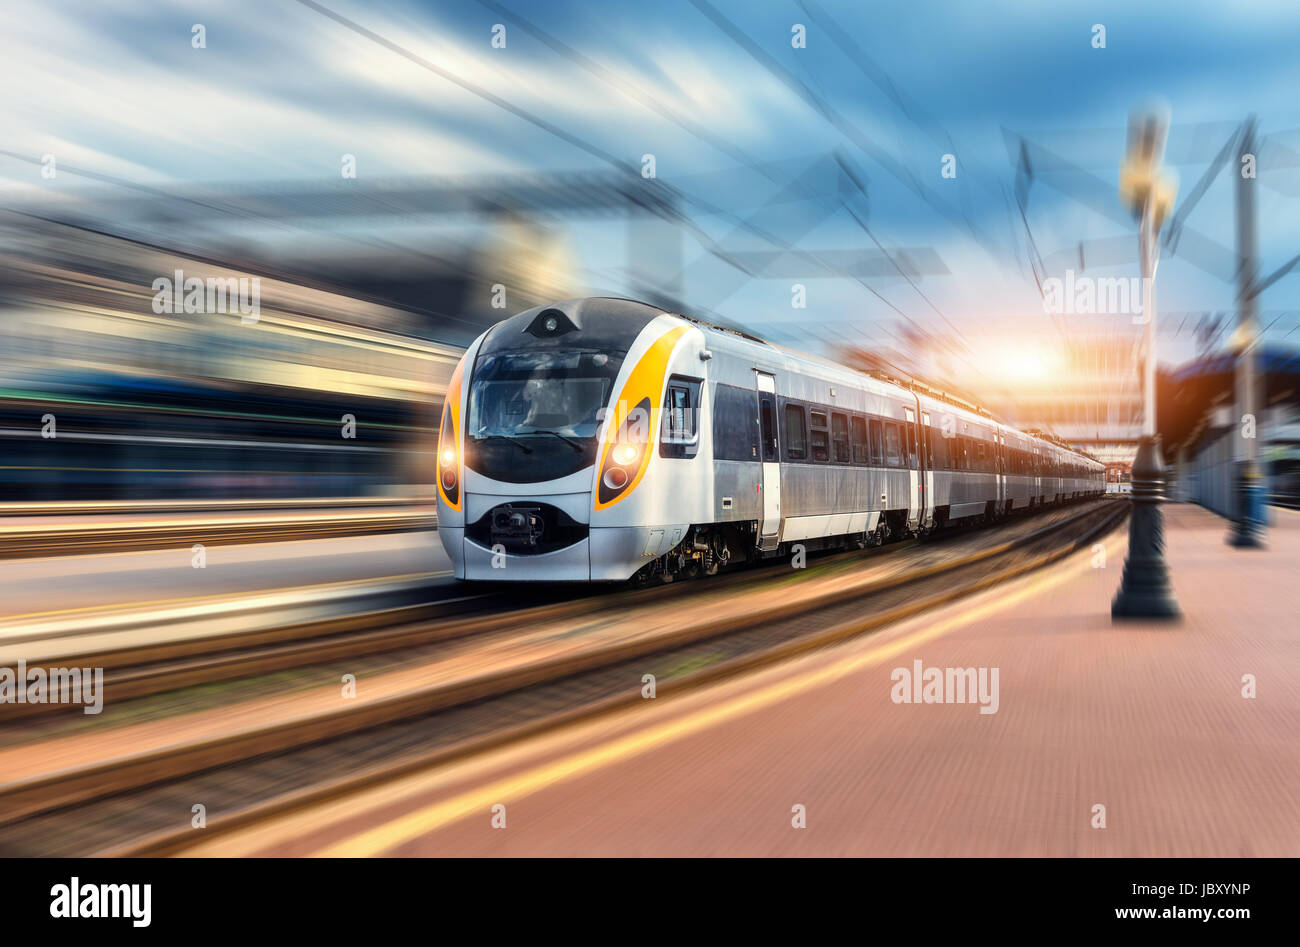 High speed train in motion at the railway station at sunset. Modern european intercity train on the railway platform with motion blur effect. Industri Stock Photo